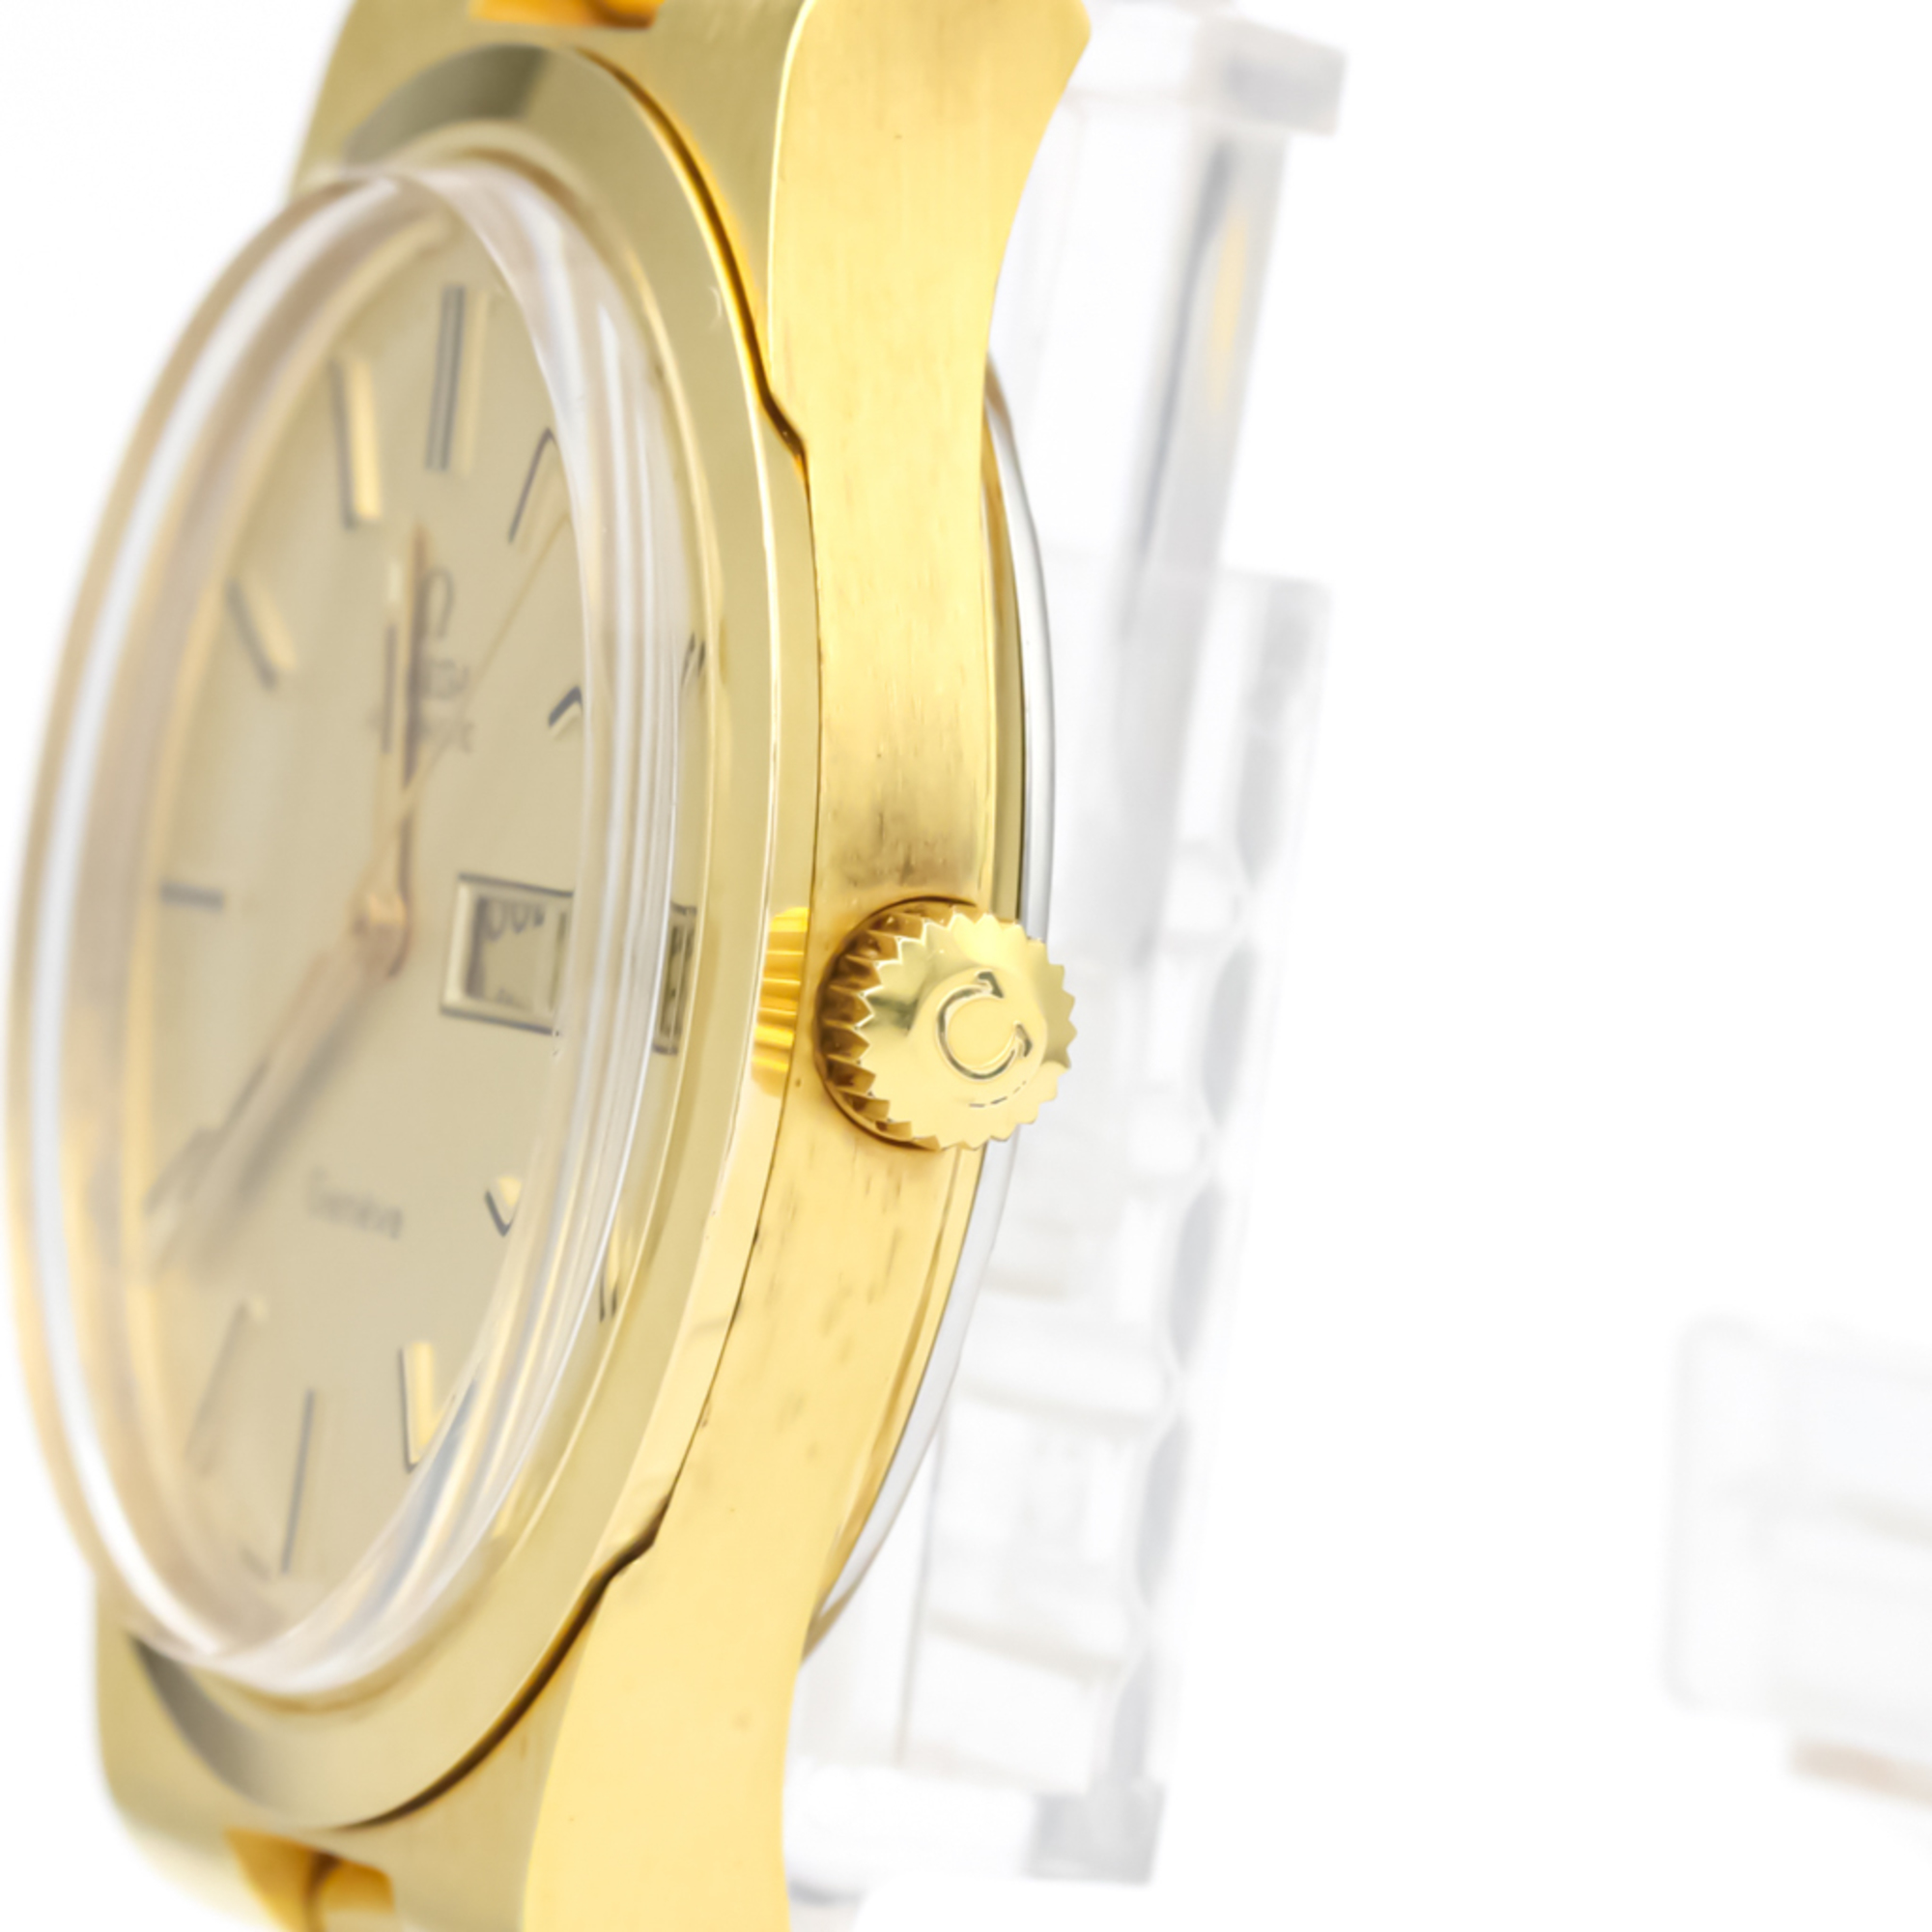 Omega Geneve Automatic Gold Plated Men's Dress Watch 166.0174